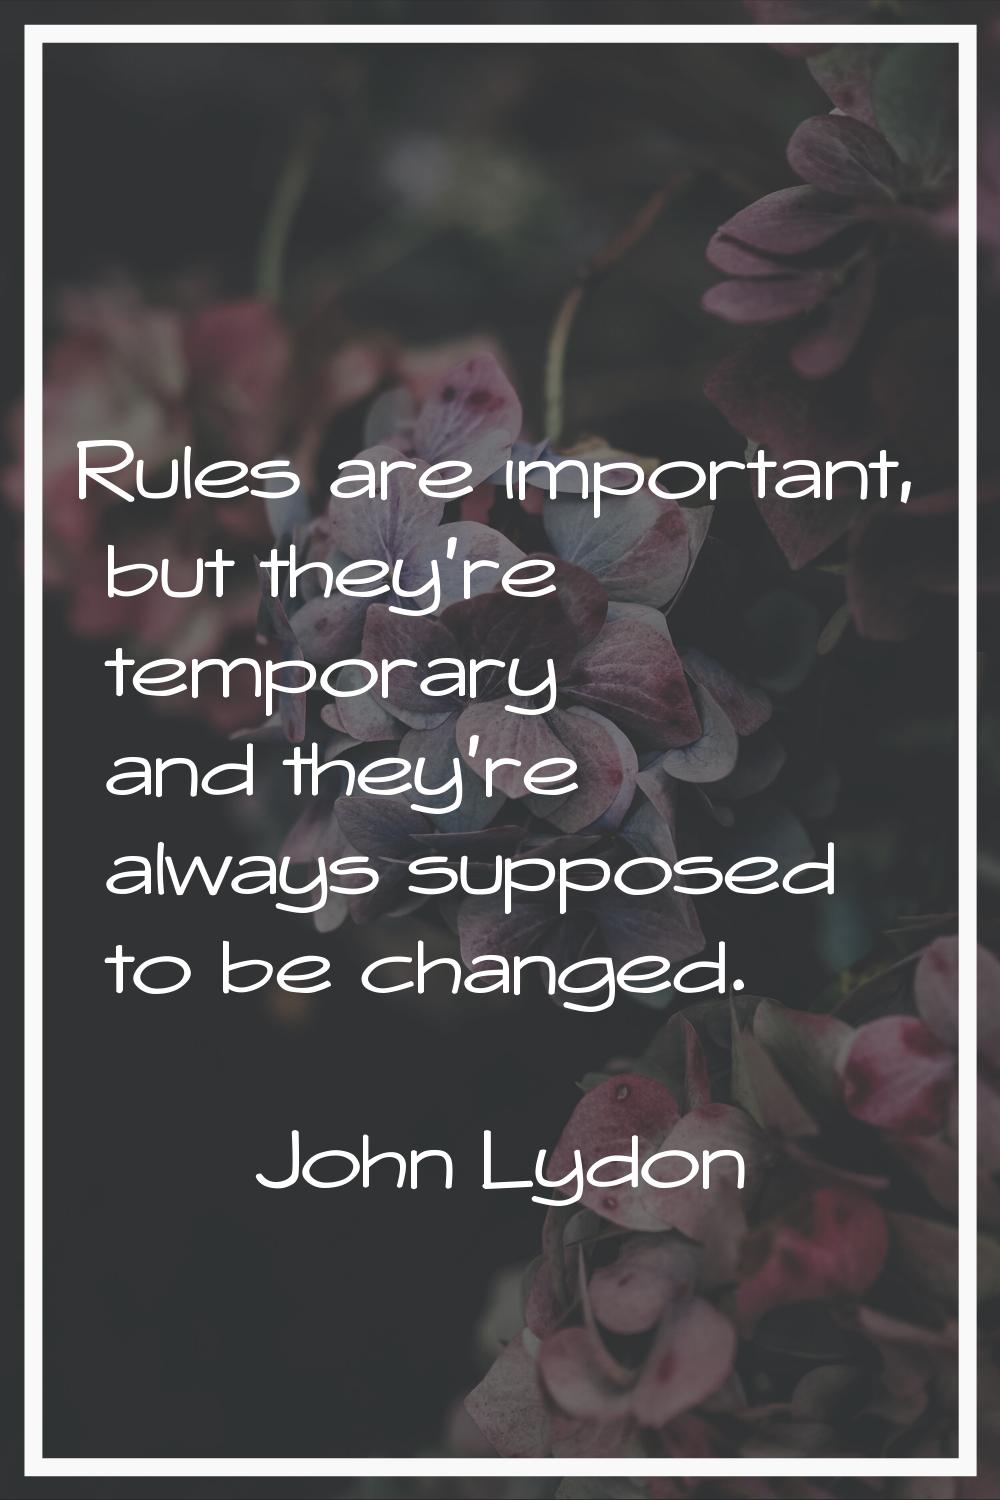 Rules are important, but they're temporary and they're always supposed to be changed.